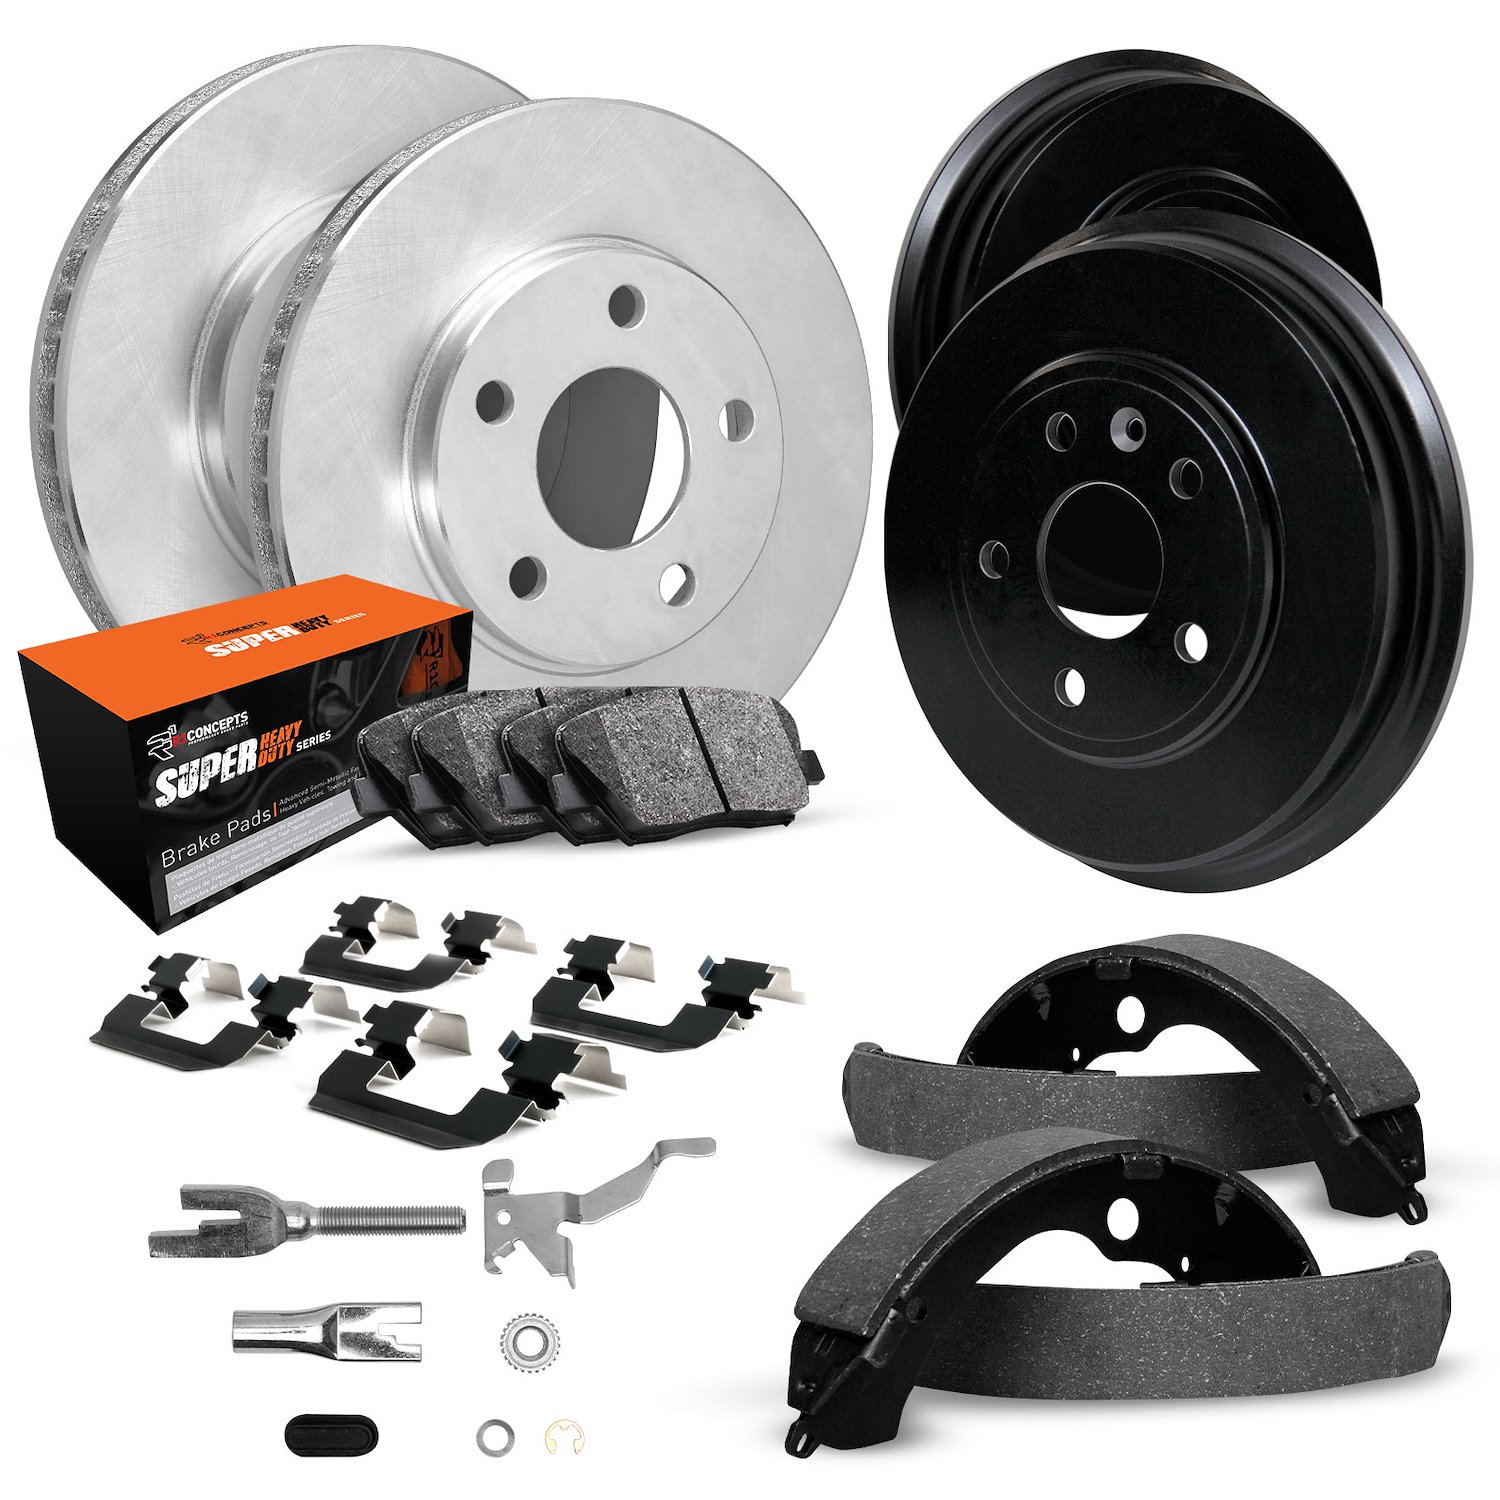 E-Line Blank Brake Rotor & Drum Set w/Super-Duty Pads, Shoes, Hardware, & Adjusters, 2003-2009 Ford/Lincoln/Mercury/Mazda